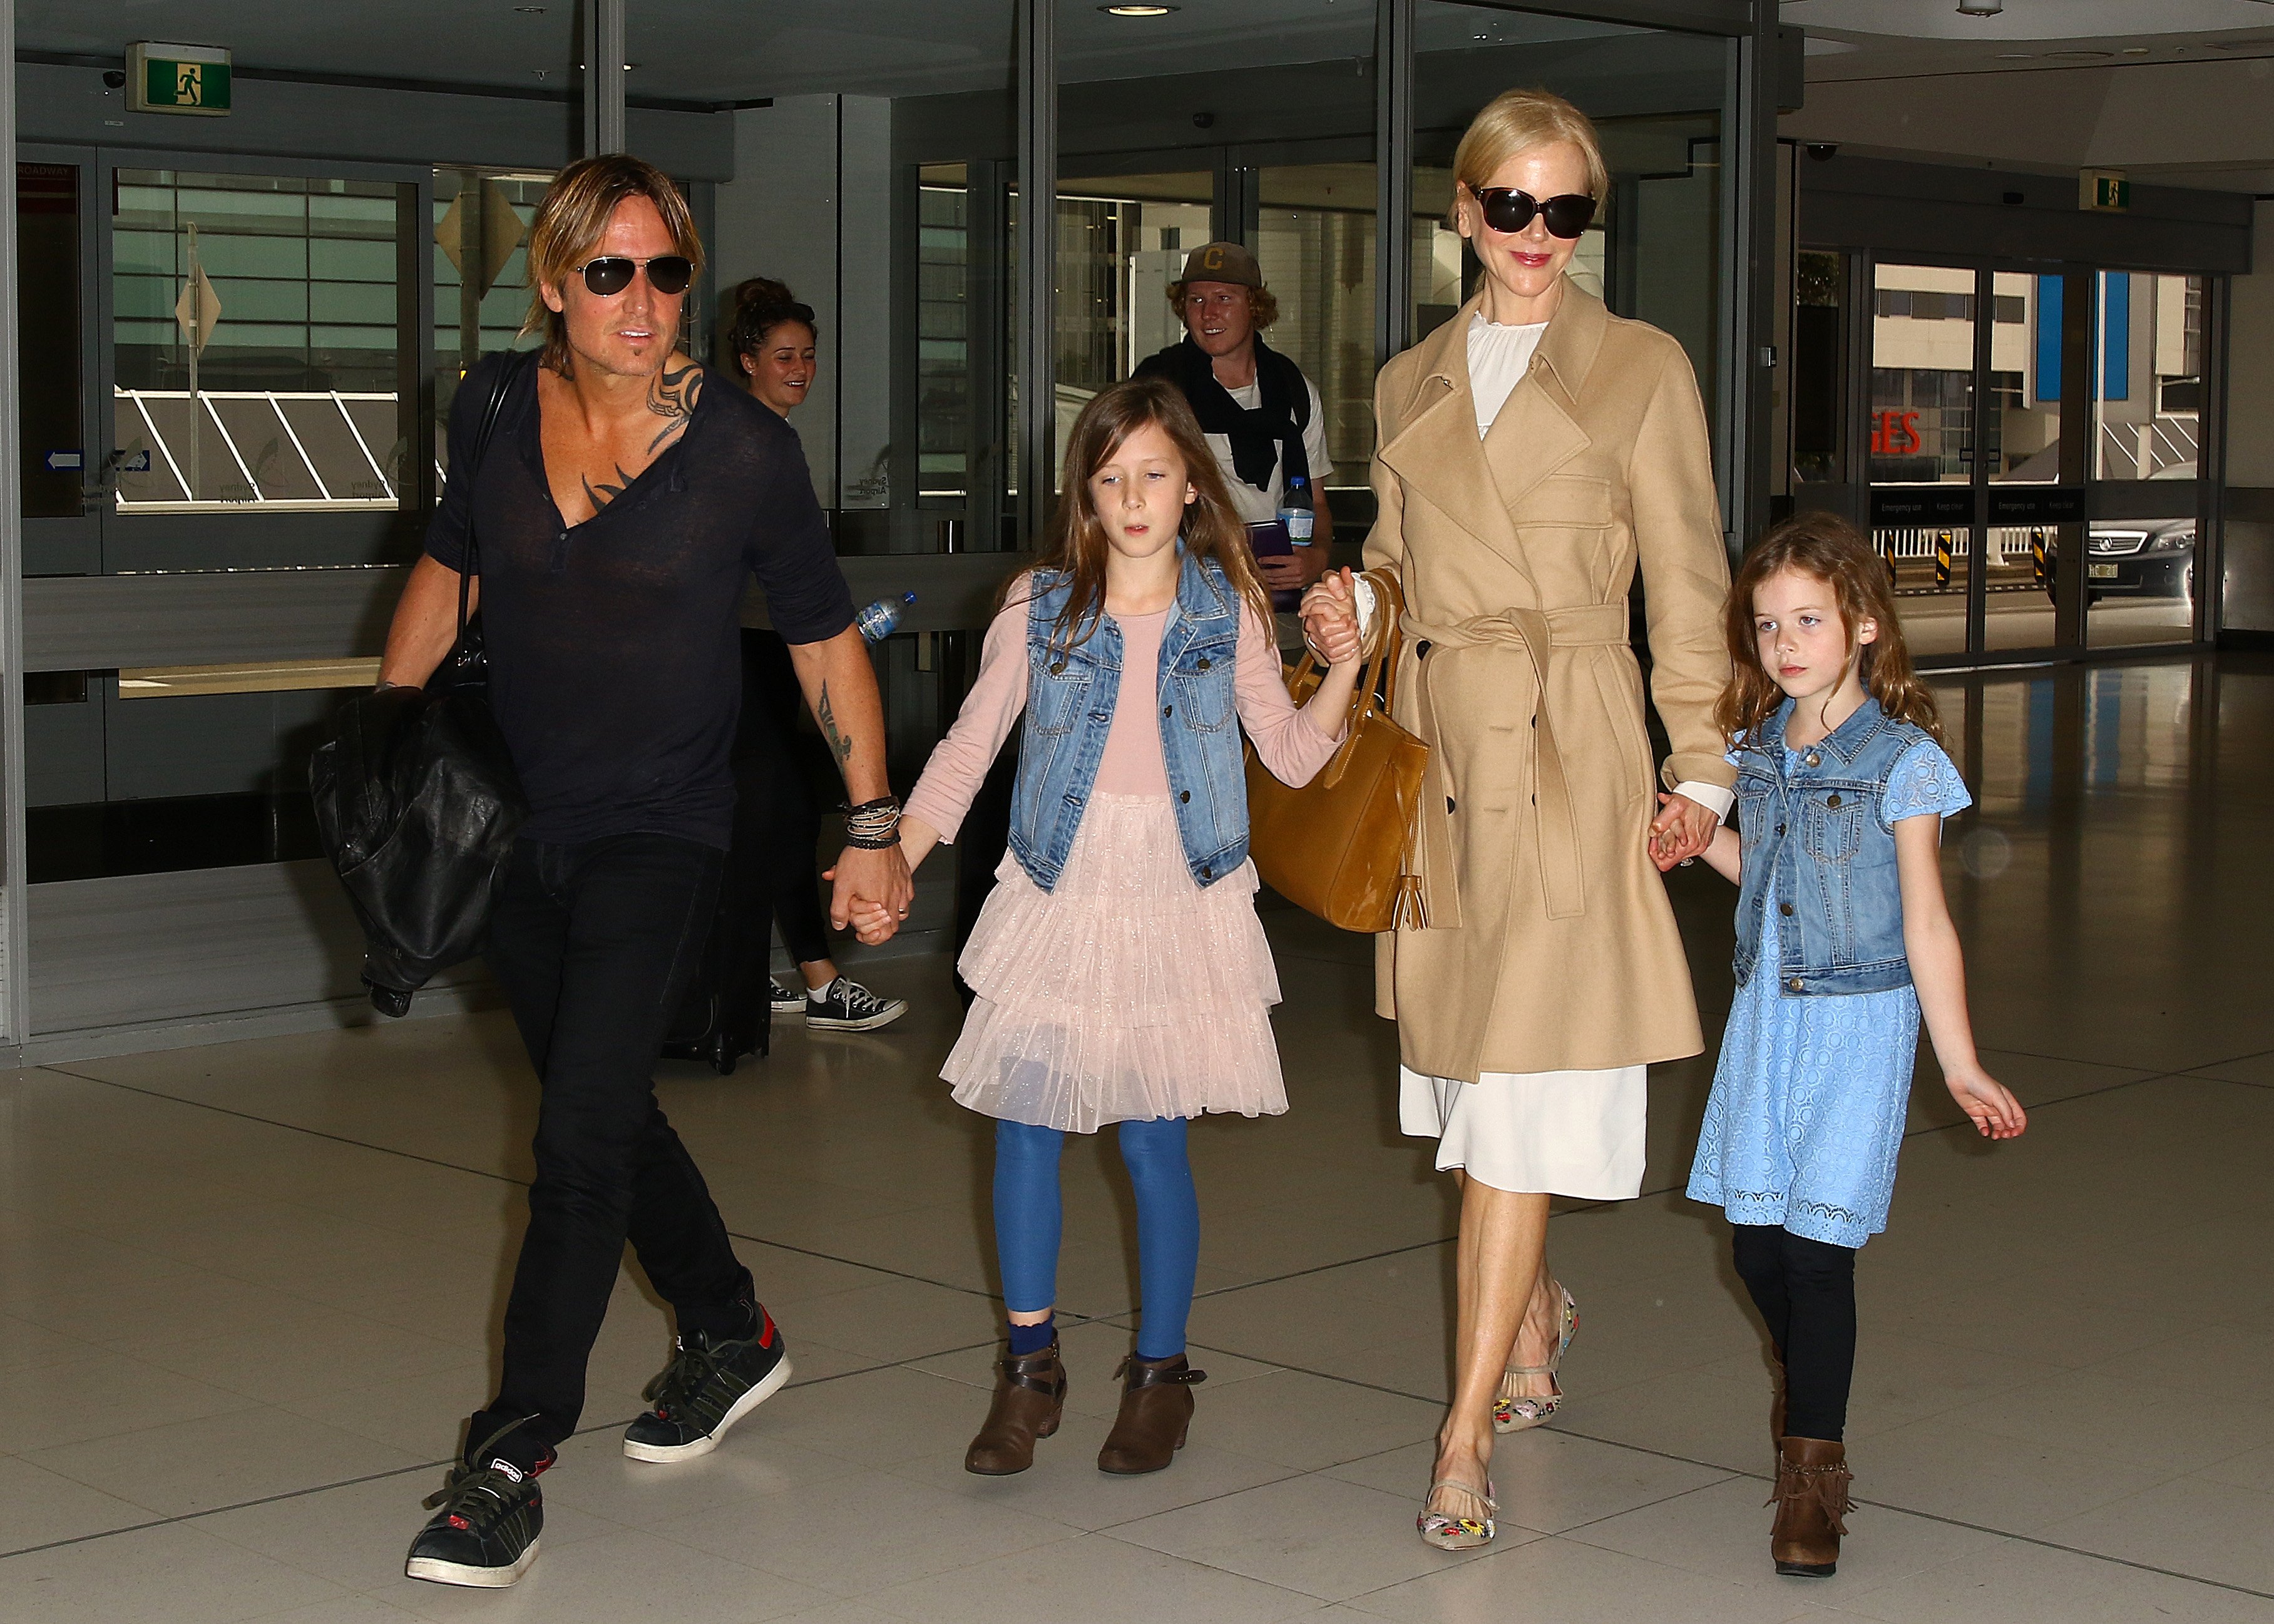 Nicole Kidman and Keith Urban at the Sydney airport with their children, Faith Margaret and Sunday Rose on March 28, 2017 in Sydney, Australia. | Source: Getty Images 